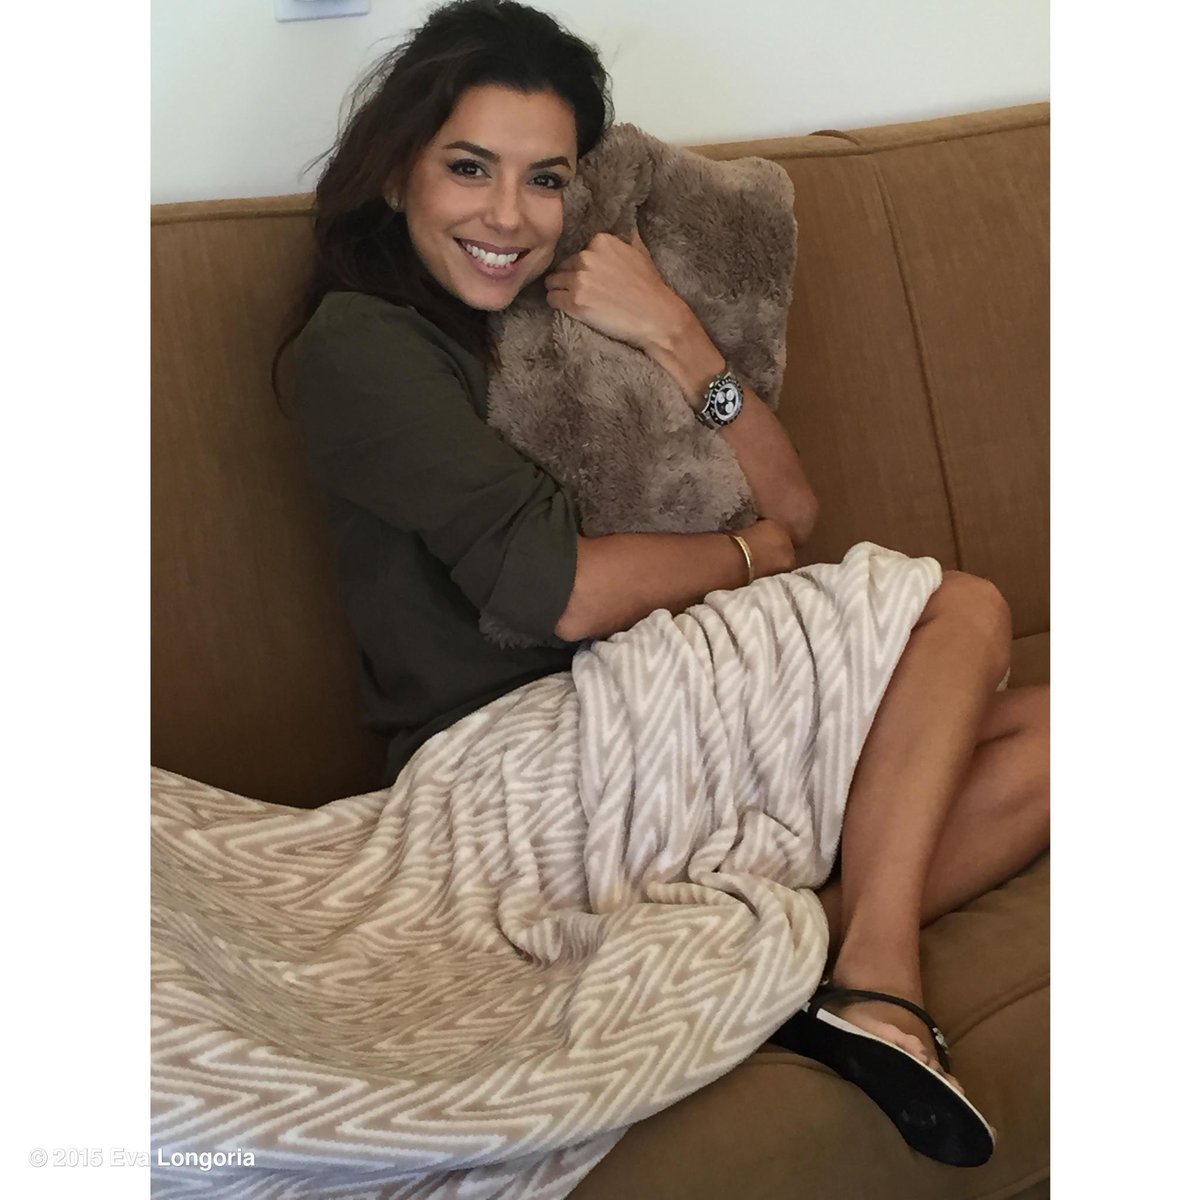 I never leave home without my travel pillow. I think my Eva Longoria Home collection needs one @JCPenney! http://t.co/jd1aaDiOWS